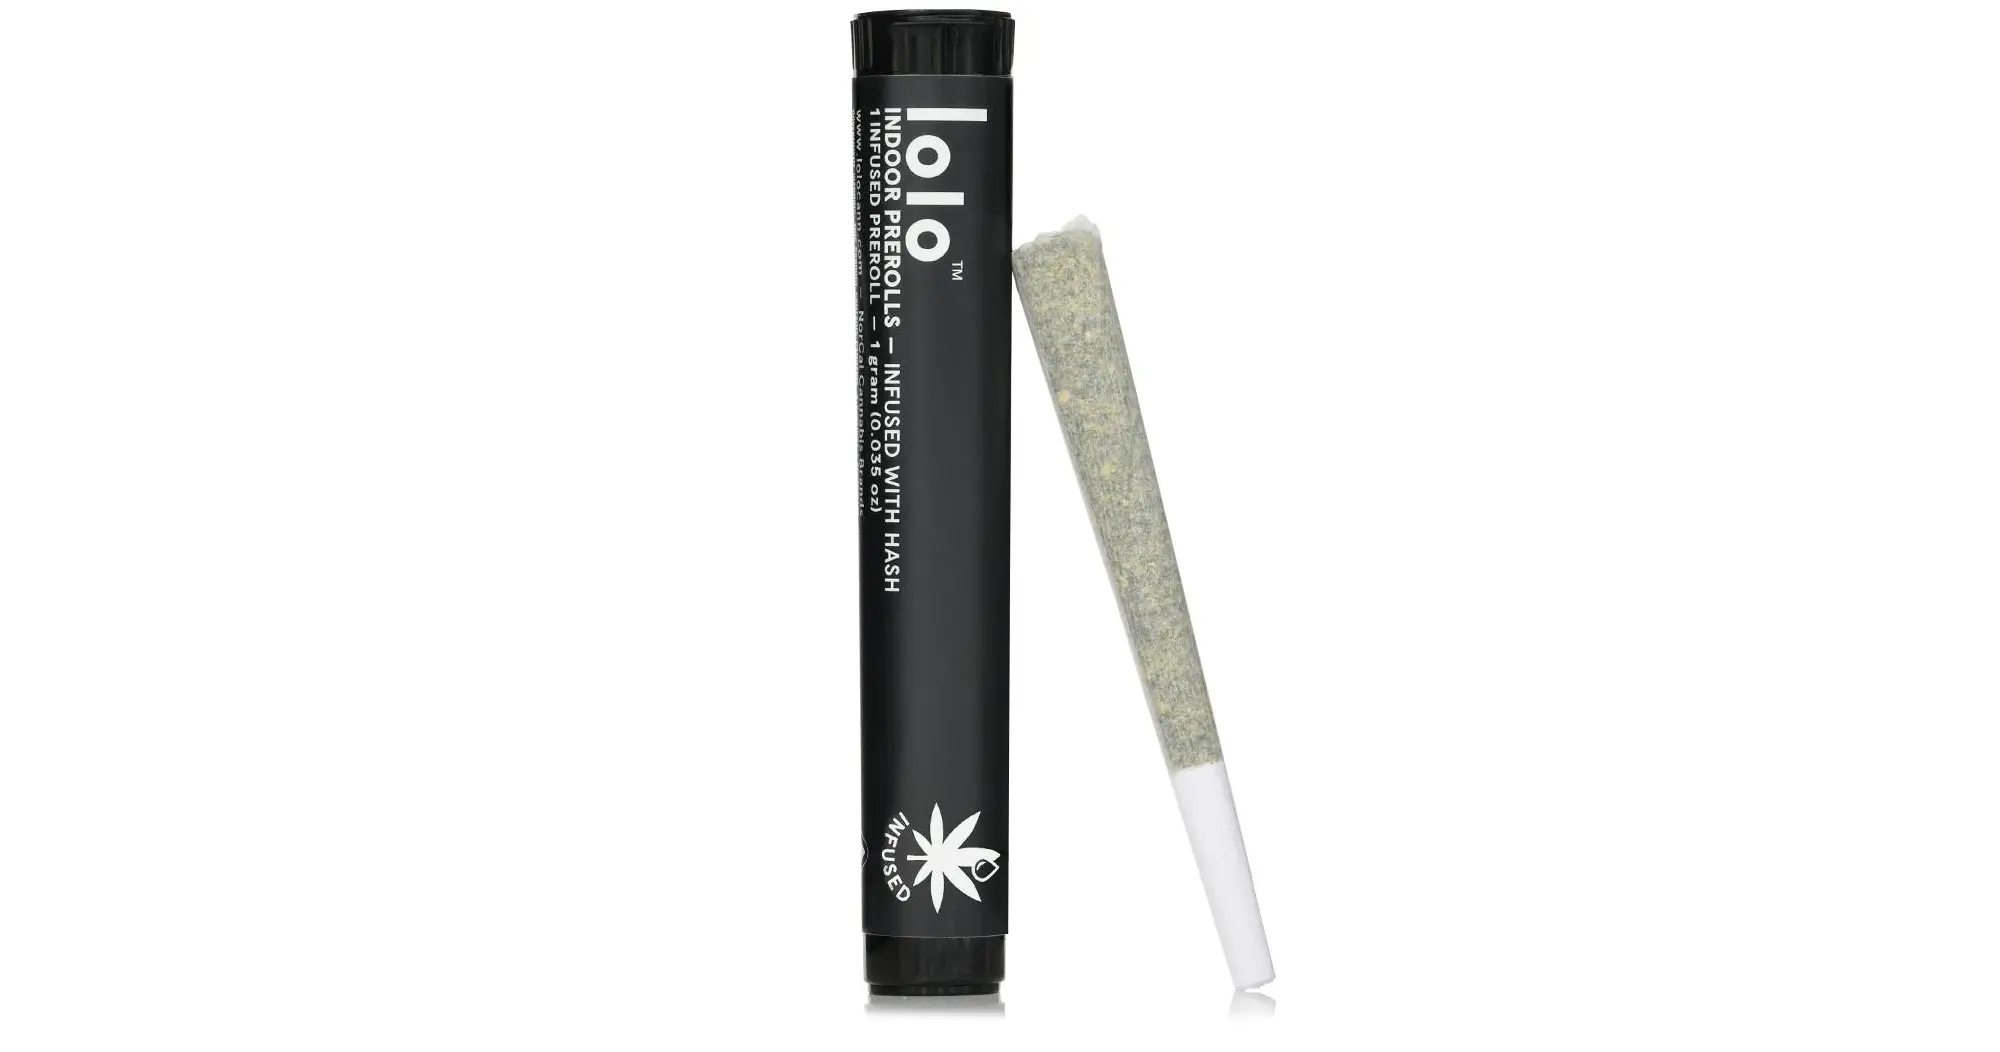 Smoke Signals Infused Pre-Roll